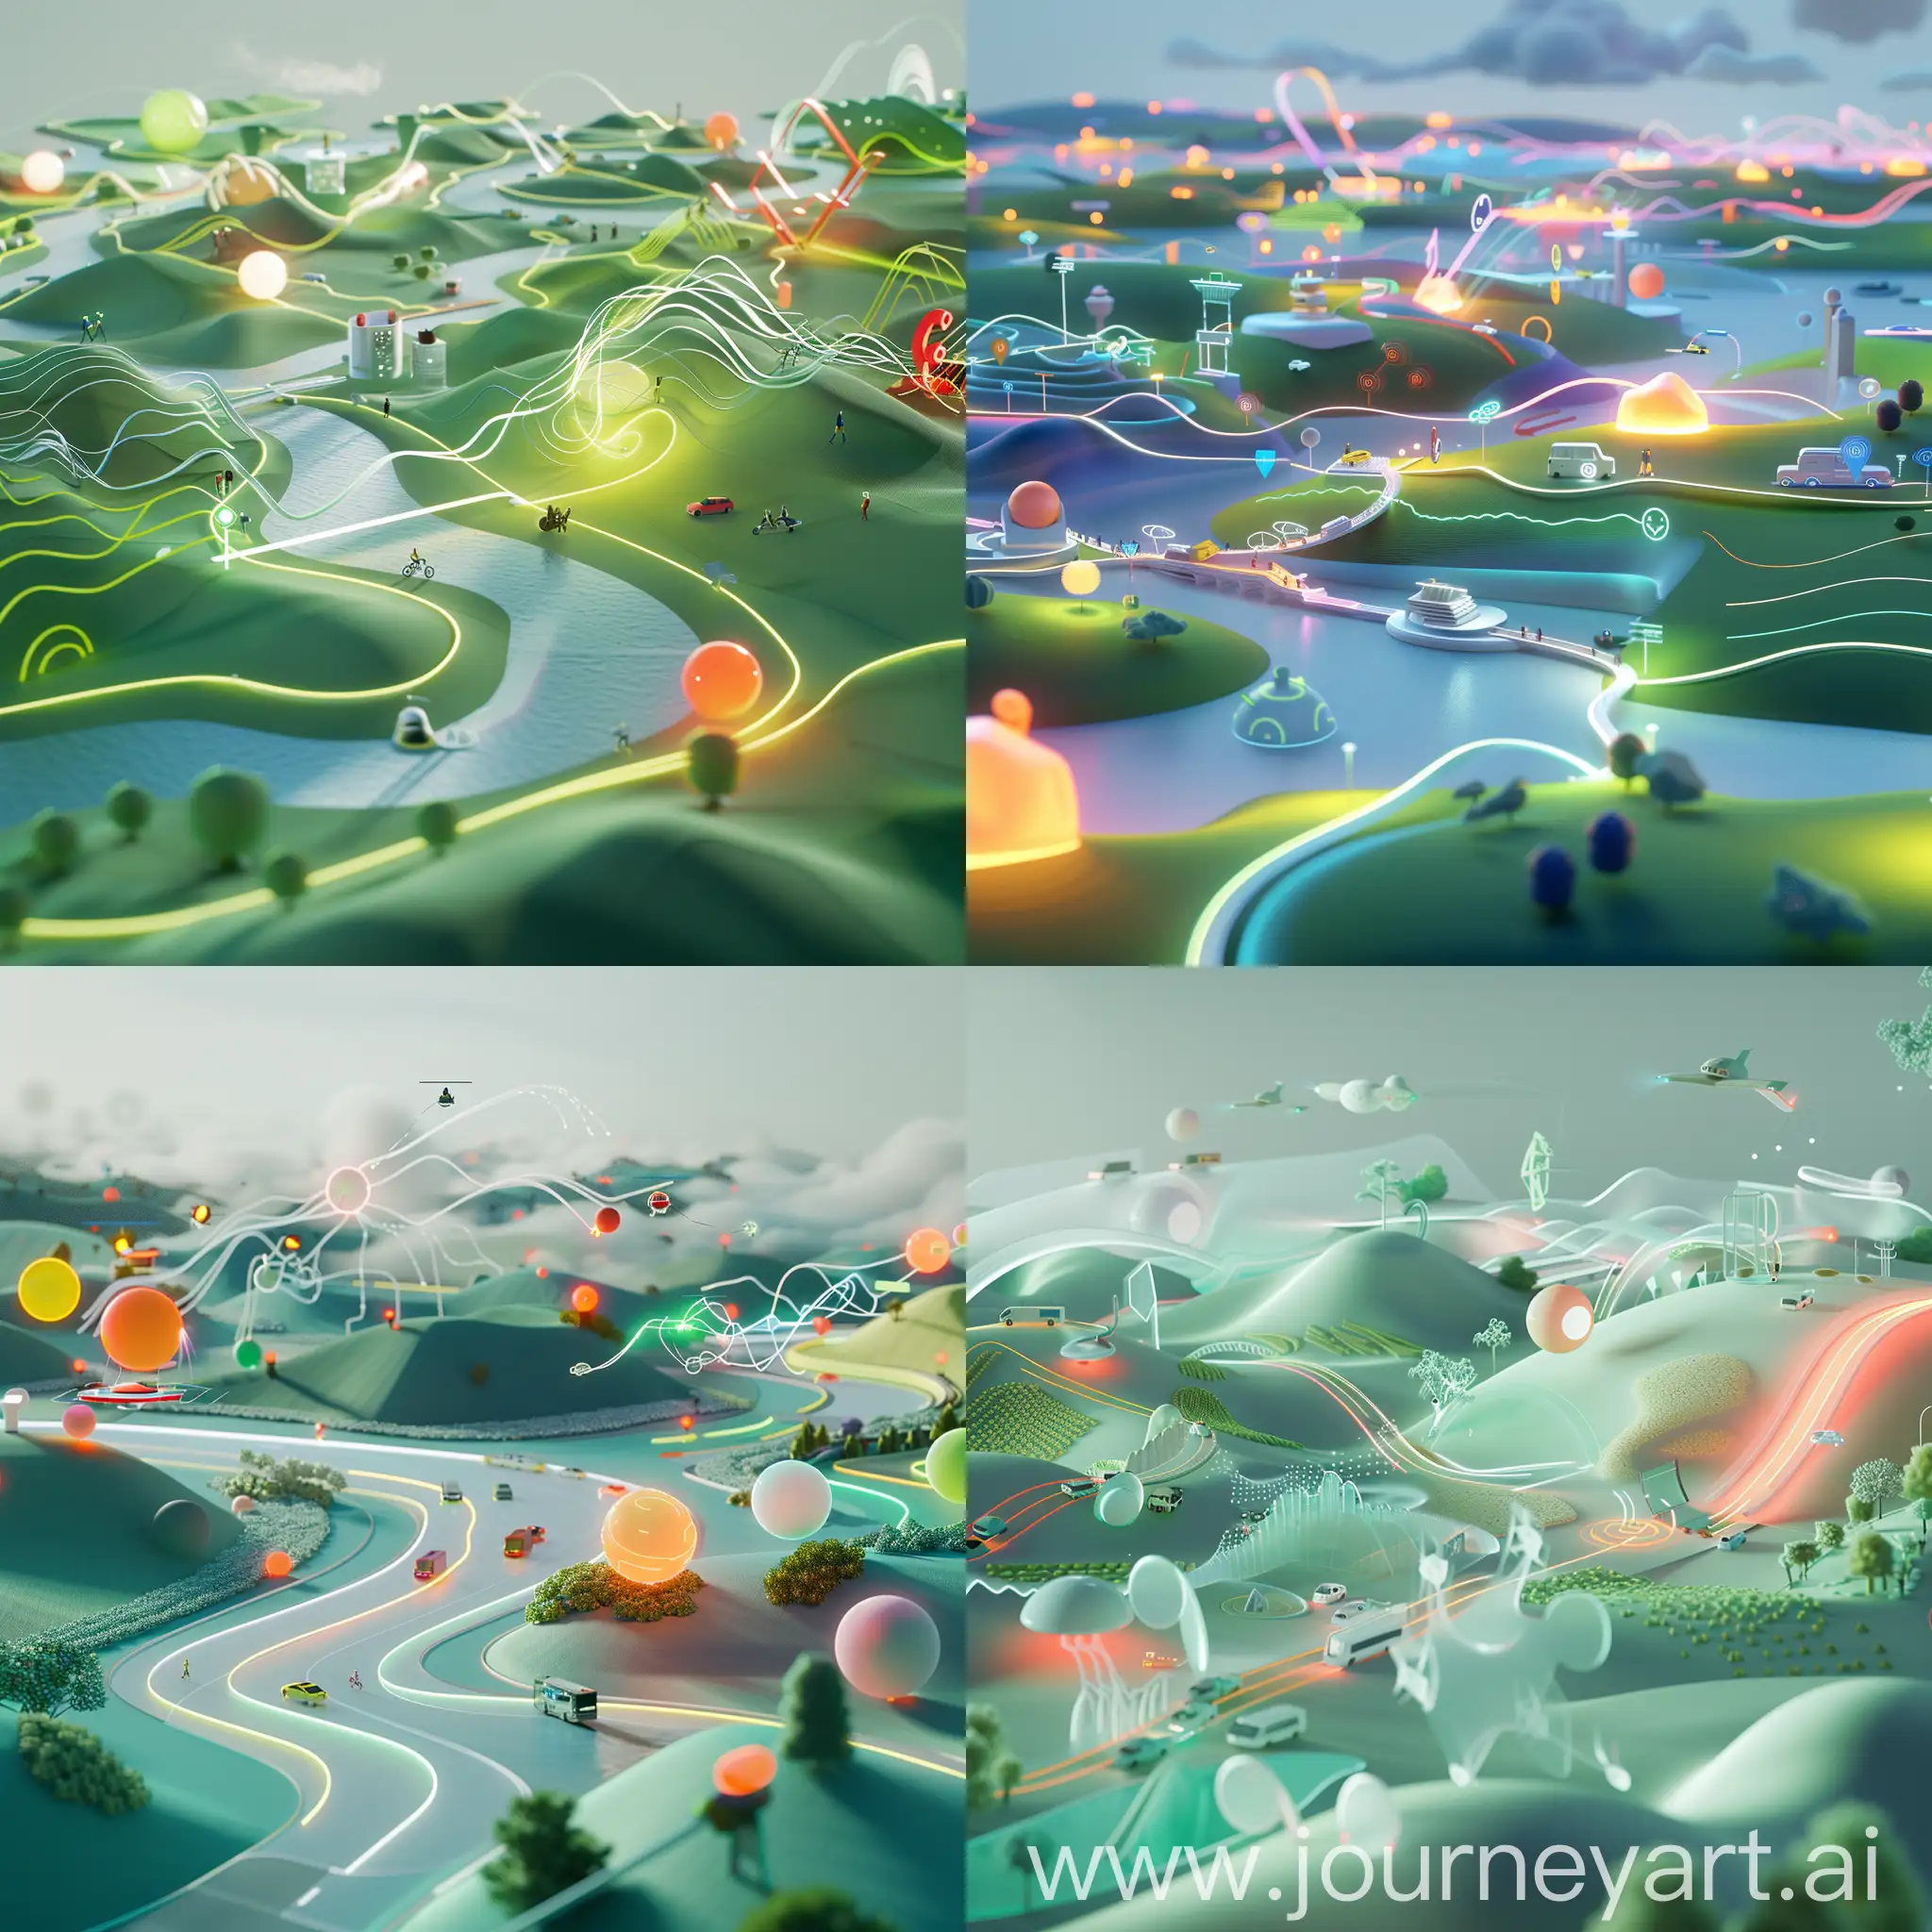  Taking into account the content provided, I will describe how to represent the given vision in an abstract 3D animation without specific products, keeping it simple yet evoking a certain atmosphere.  The animation begins with a vast, open landscape symbolizing the global transportation network. Various abstract shapes representing different modes of transportation emerge and interconnect seamlessly, signifying inclusivity and accessibility for people of all abilities, backgrounds, and locations.  As the animation progresses, these shapes transform and morph into dynamic pathways and infrastructure, illustrating the pursuit of an easily accessible transportation system. Colors shift harmoniously, reflecting the diversity and interconnectedness of transportation options.  Next, the animation transitions to depict sustainability, with vibrant greenery and flowing water embodying eco-friendly transportation choices. Abstract representations of public transit, bicycles, pedestrians, and electric vehicles move gracefully, showcasing their role in reducing carbon emissions and promoting healthier lifestyles.  Finally, the animation highlights technological innovation through futuristic elements such as glowing orbs symbolizing autonomous driving, ethereal wisps representing air taxis, and interconnected networks symbolizing shared mobility solutions and real-time transportation information.  Throughout the animation, a sense of unity, progress, and possibility permeates, encapsulating the vision of an inclusive, accessible, and efficient global transportation system.